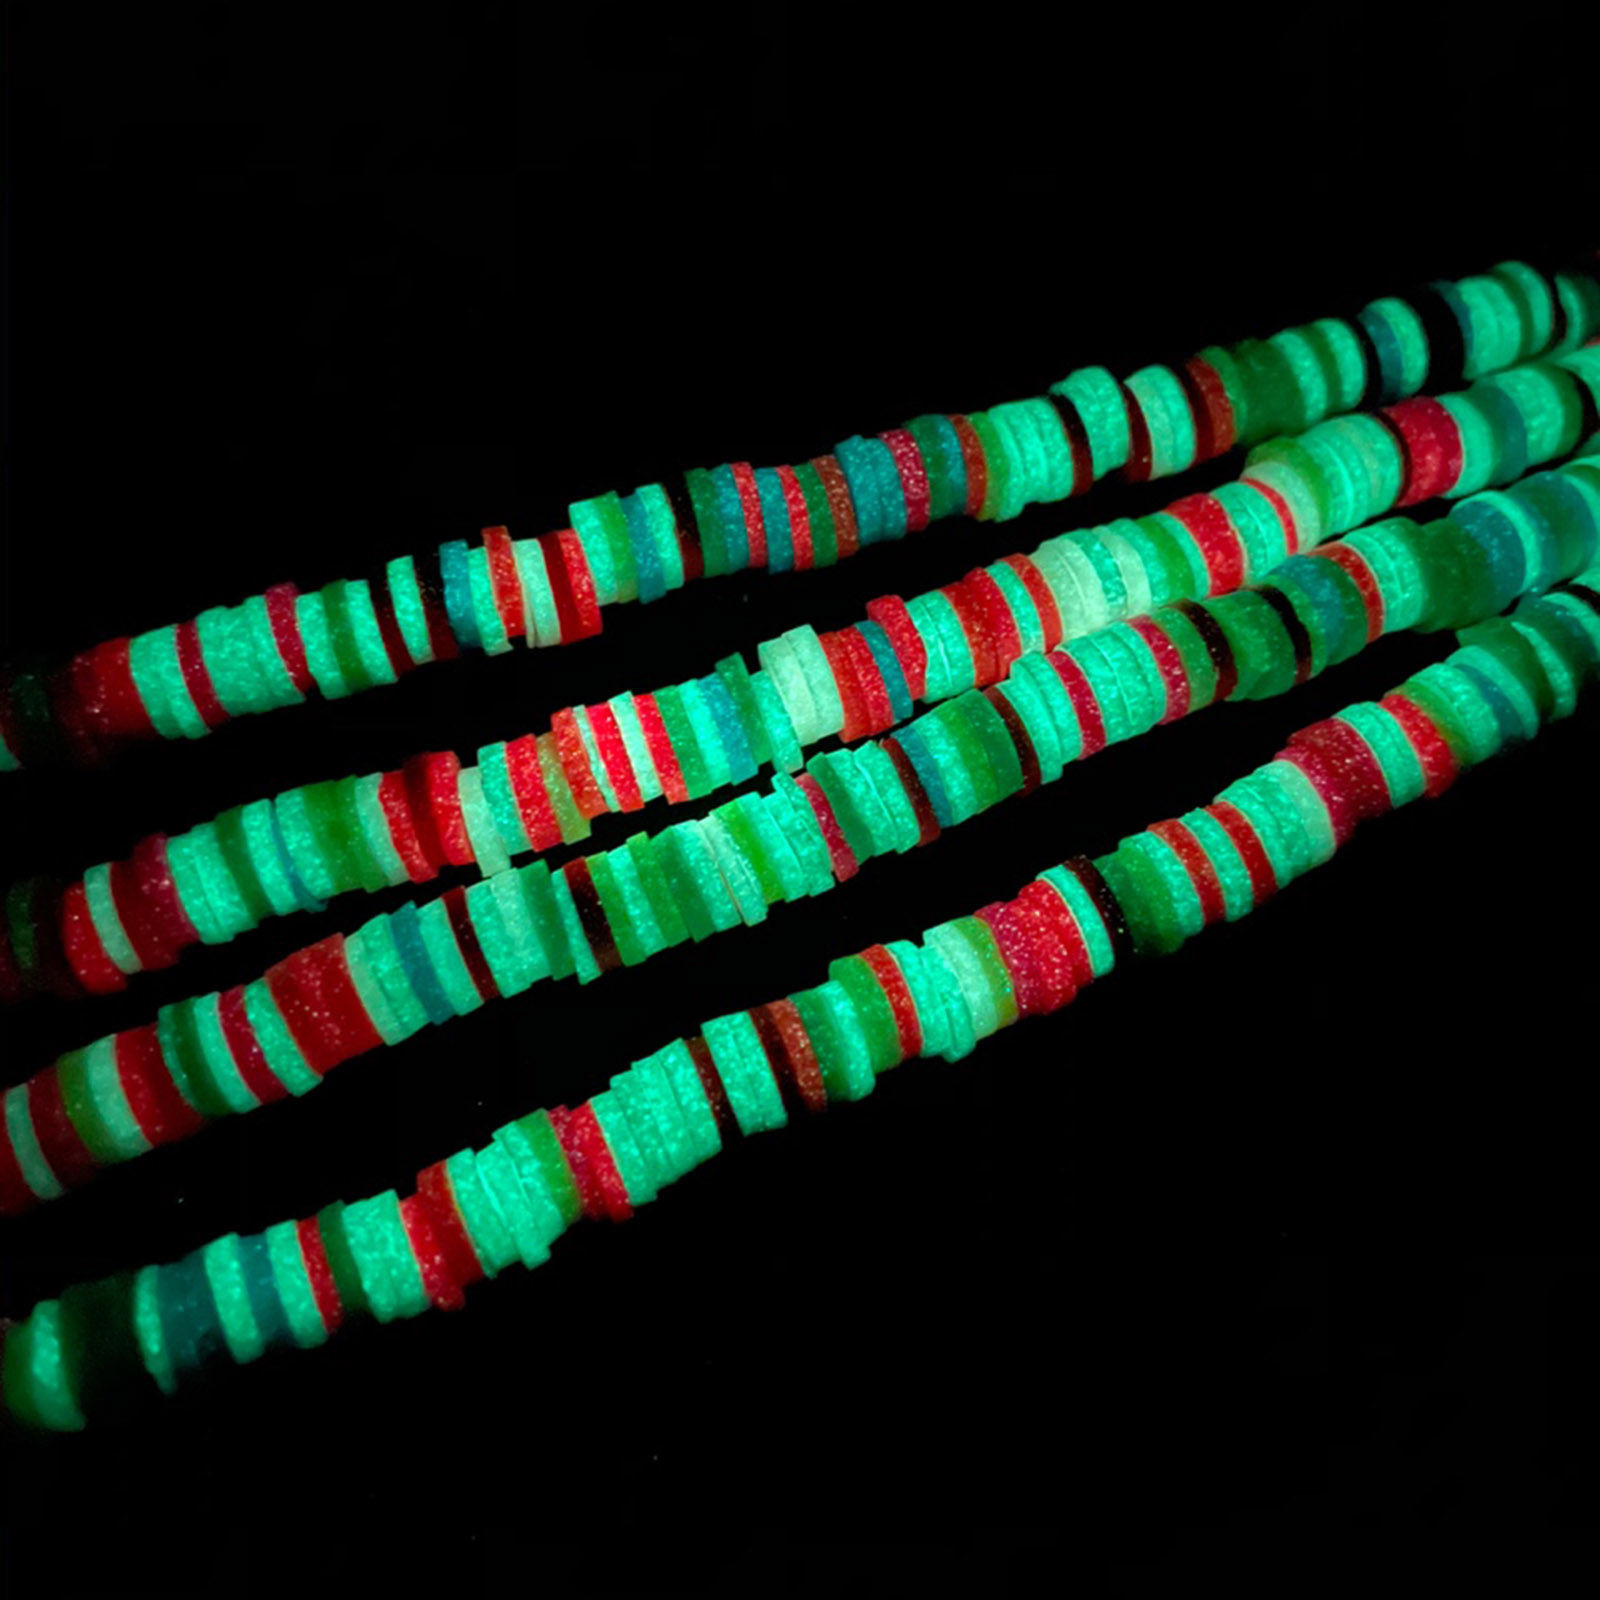 Picture of Polymer Clay Katsuki Beads Round At Random Color Glow In The Dark Luminous About 4mm Dia, Hole: Approx 2.1mm, 40.5cm(16") - 39.5cm(15 4/8") long, 2 Strands (Approx 270-260 PCs/Strand)